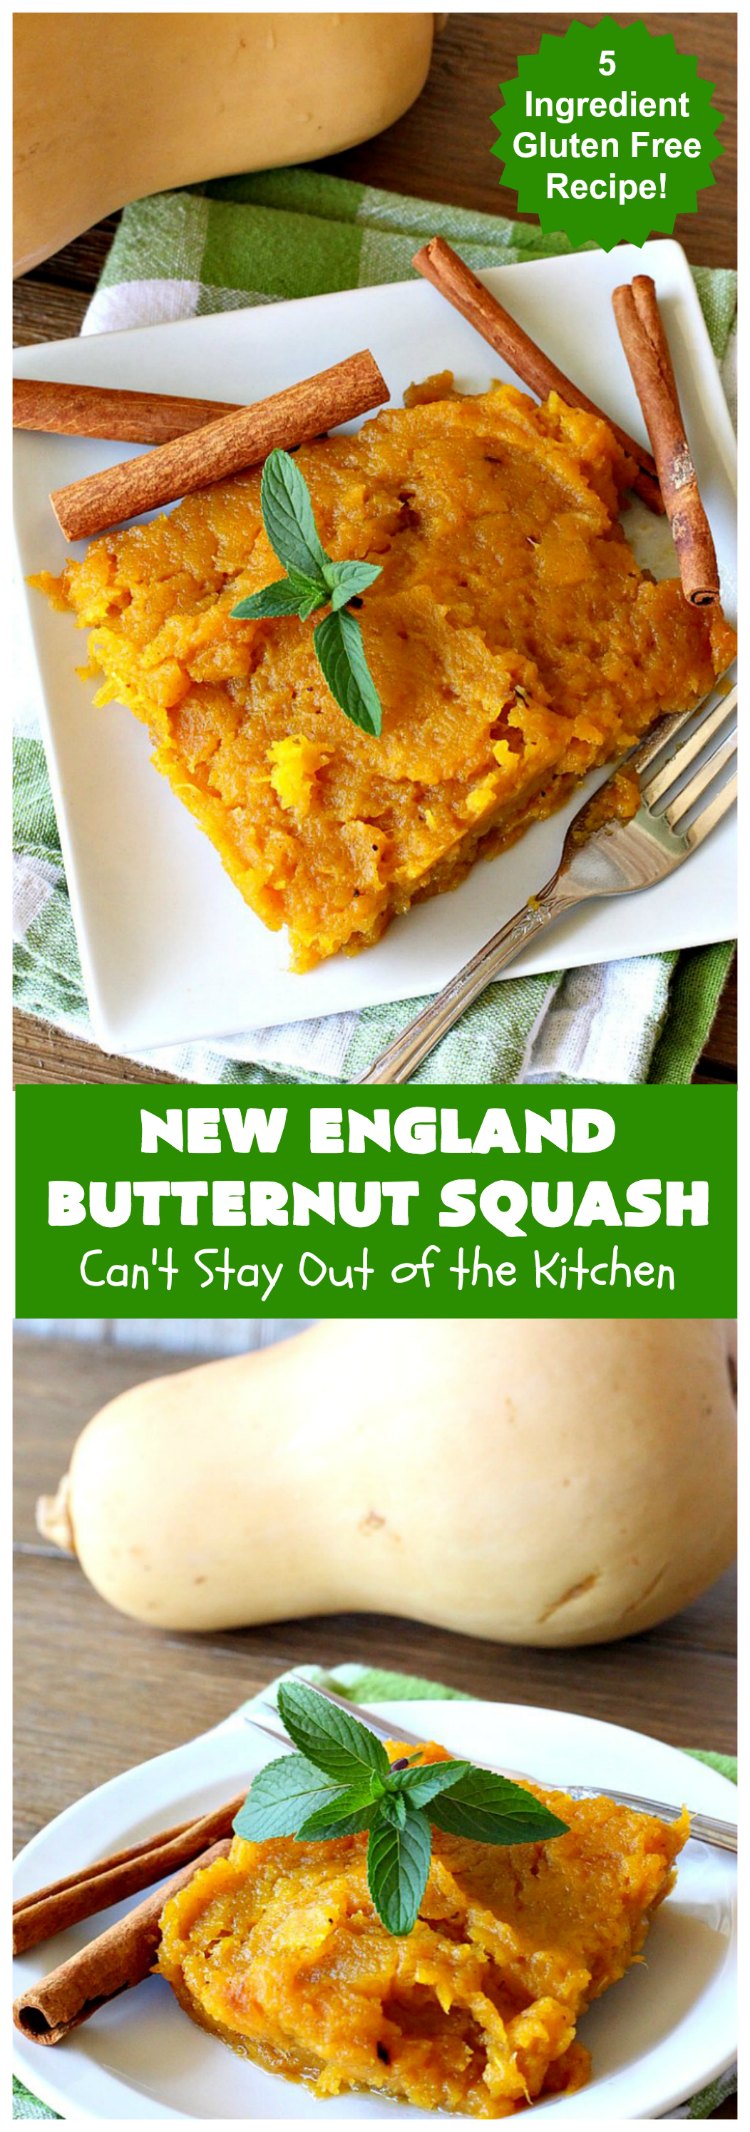 New England Butternut Squash | Can't Stay Out of the Kitchen | this delightful 5-ingredient #recipe is perfect for company, #holiday or family dinners. It's seasoned with #cinnamon & #MapleSyrup & so delicious. #veggie #GlutenFree #NewEngland #NewEnglandButternutSquash #squash #ButternutSquash